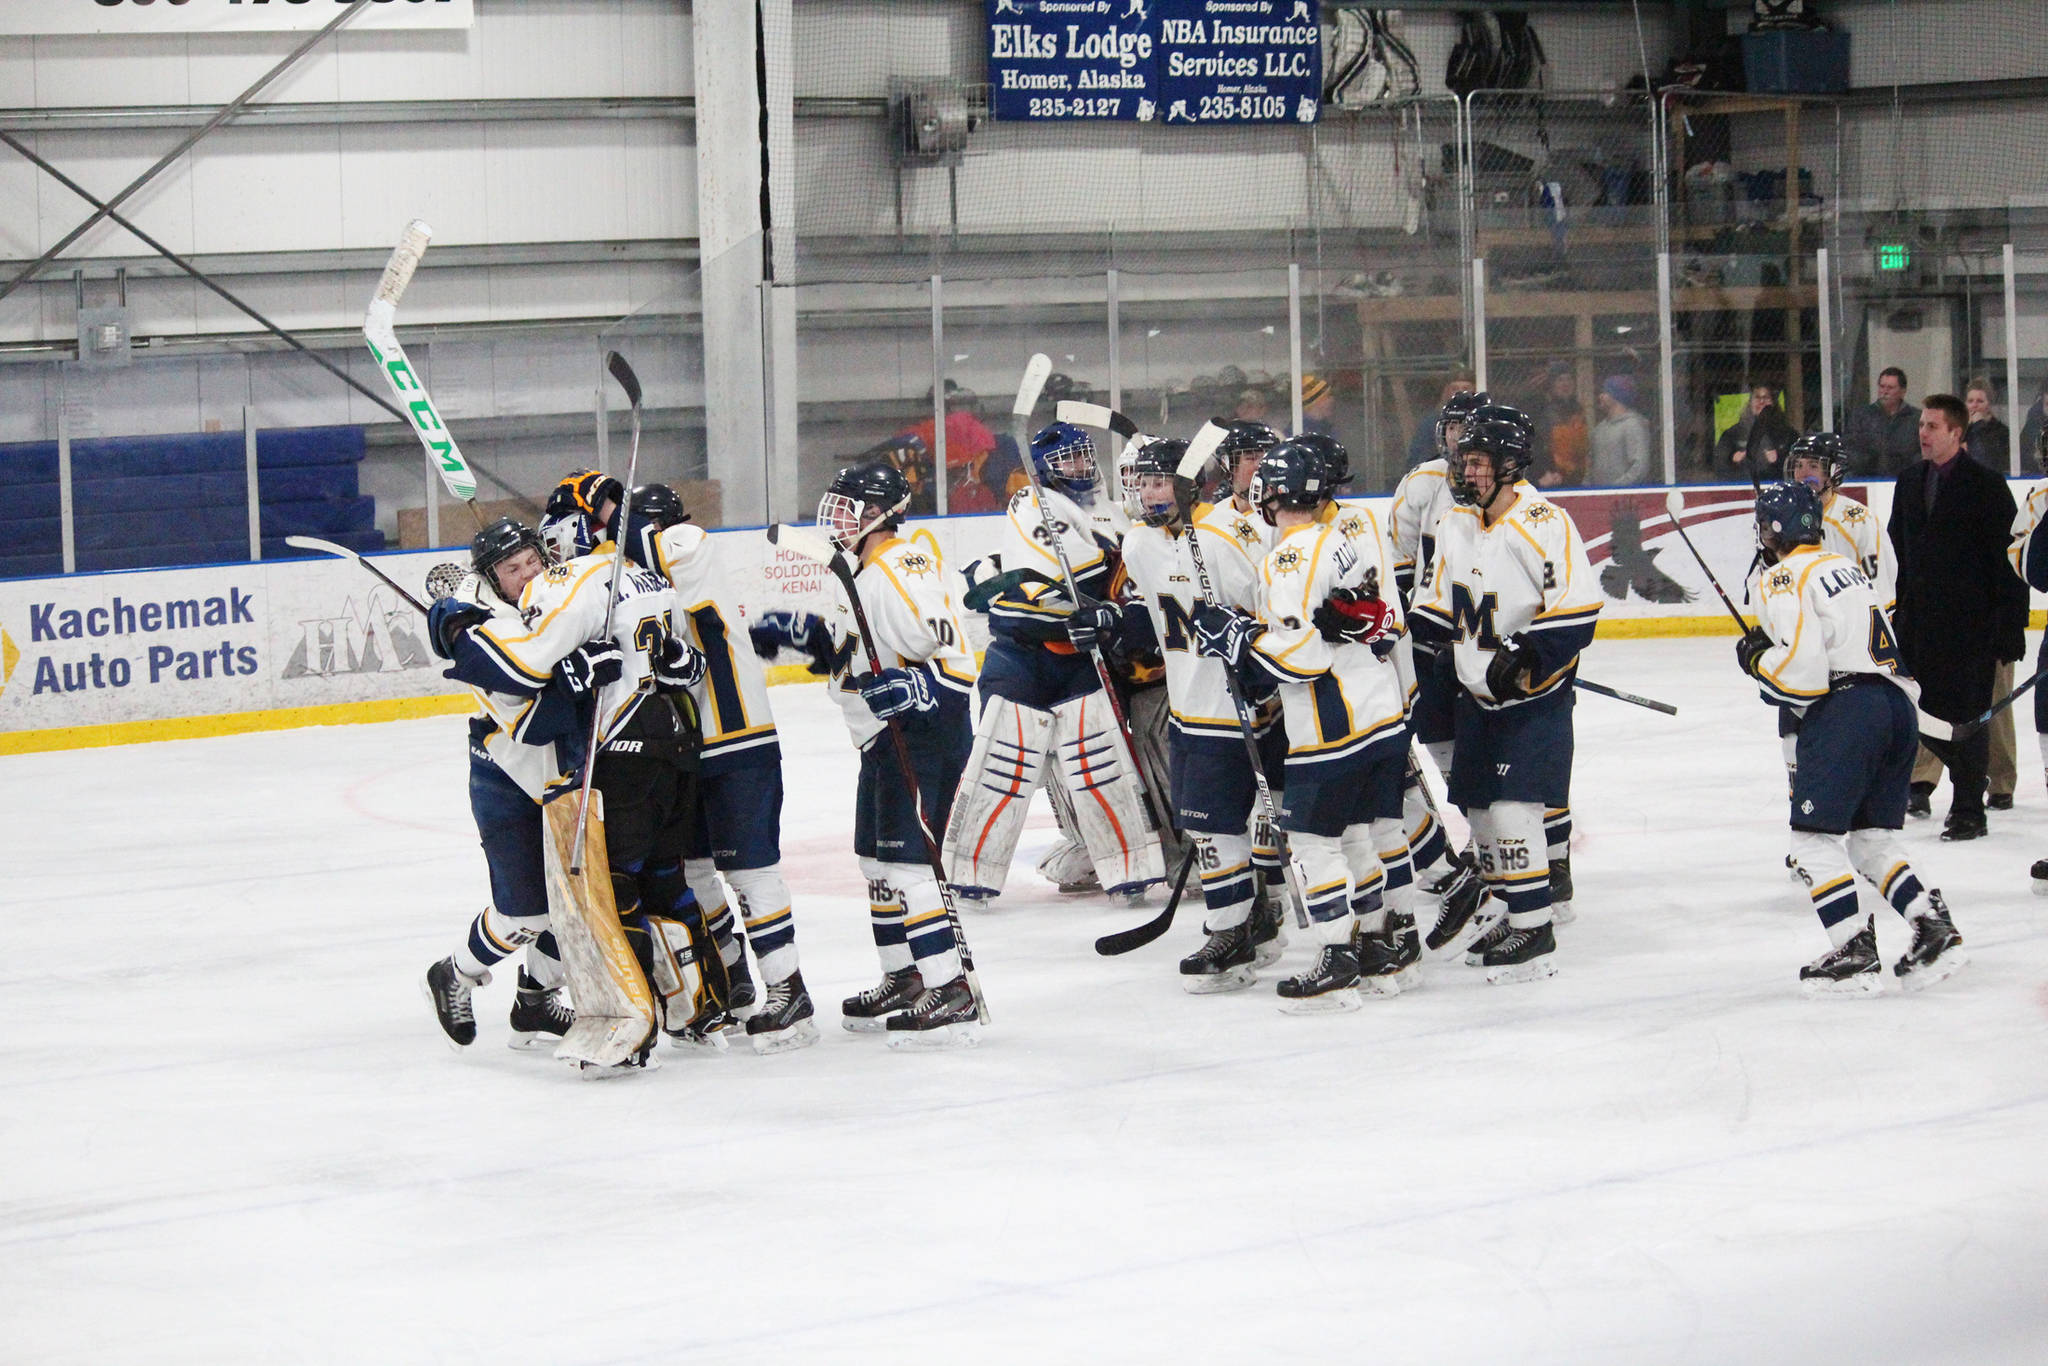 Homer High School’s hockey team celebrates its 2-1 win against Colony High School on Friday, Dec. 1, 2017 at Kevin Bell Arena in Homer, Alaska. Homer’s Ethan Pitzman scored the winning goal with less than 11 seconds left on the clock in overtime. The Mariners swept all three Mat-Su Valley teams they played this weekend, moving to 3-0 in conference play. (Photo by Megan Pacer/Homer News)